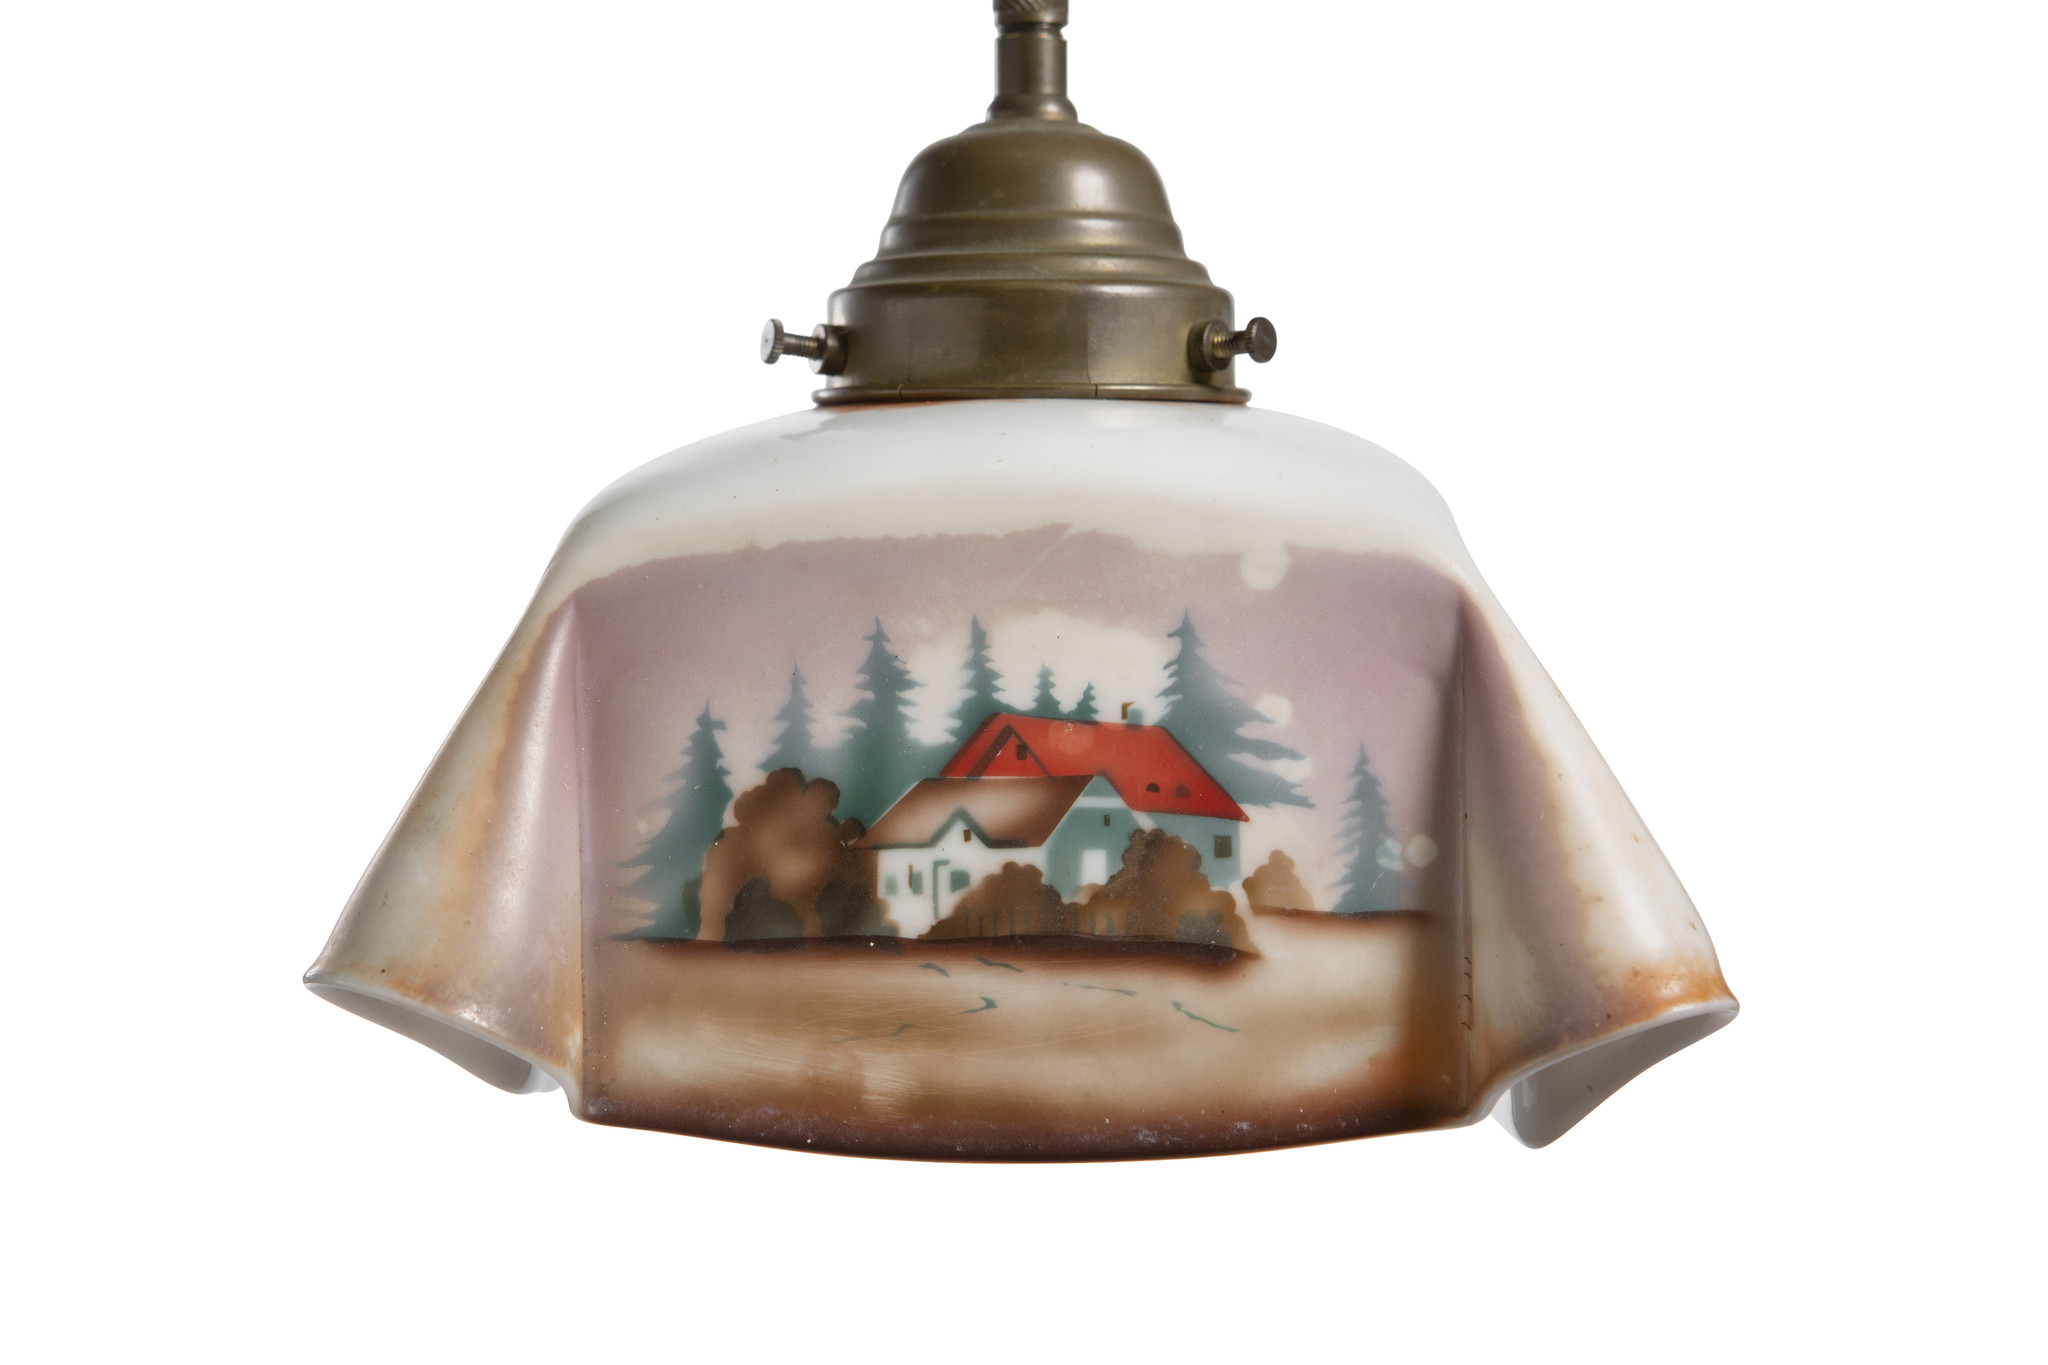 Kitchen lamp, decoratively painted landscape, ca 1930 - Lamplord ...